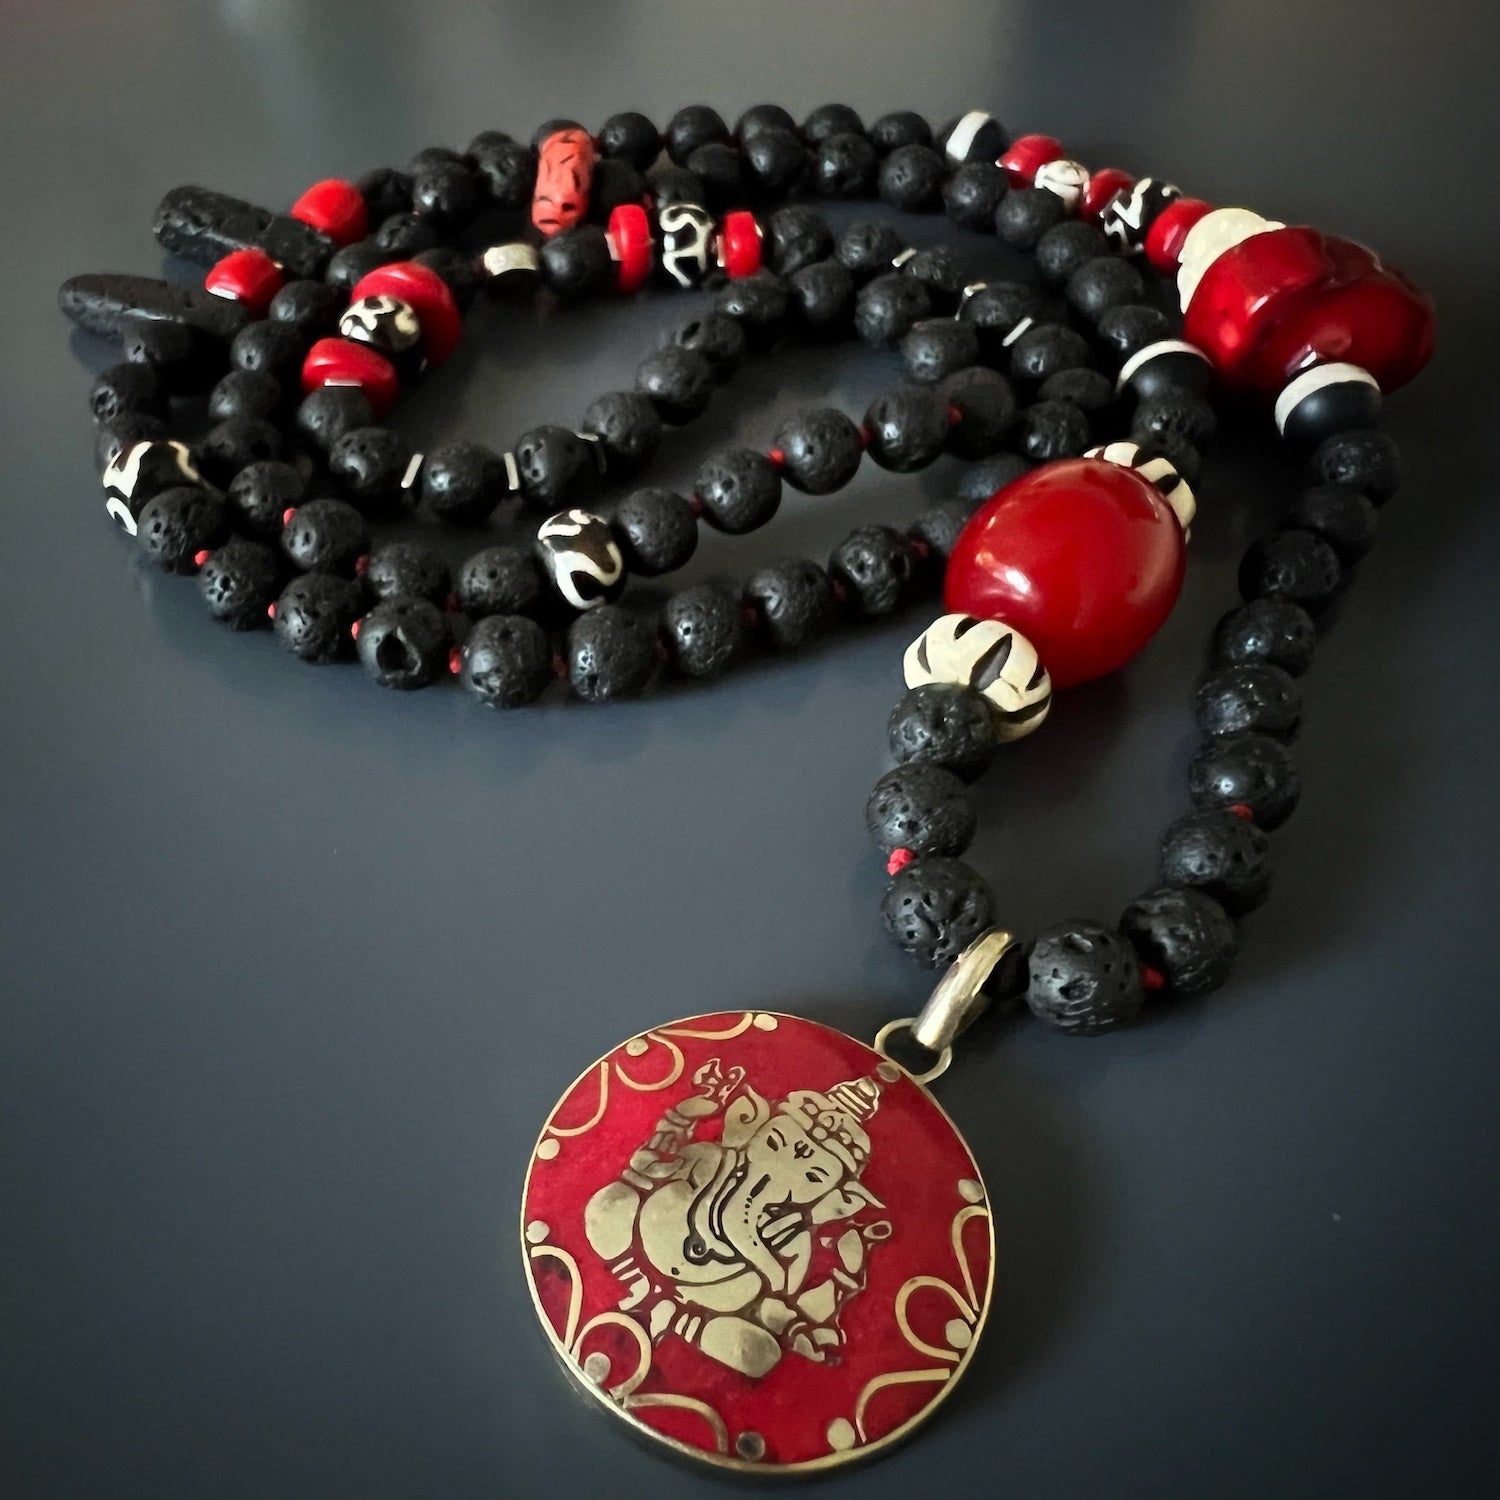 Meditation and Yoga Necklace with Red Coral Beads and Ganesha Charm